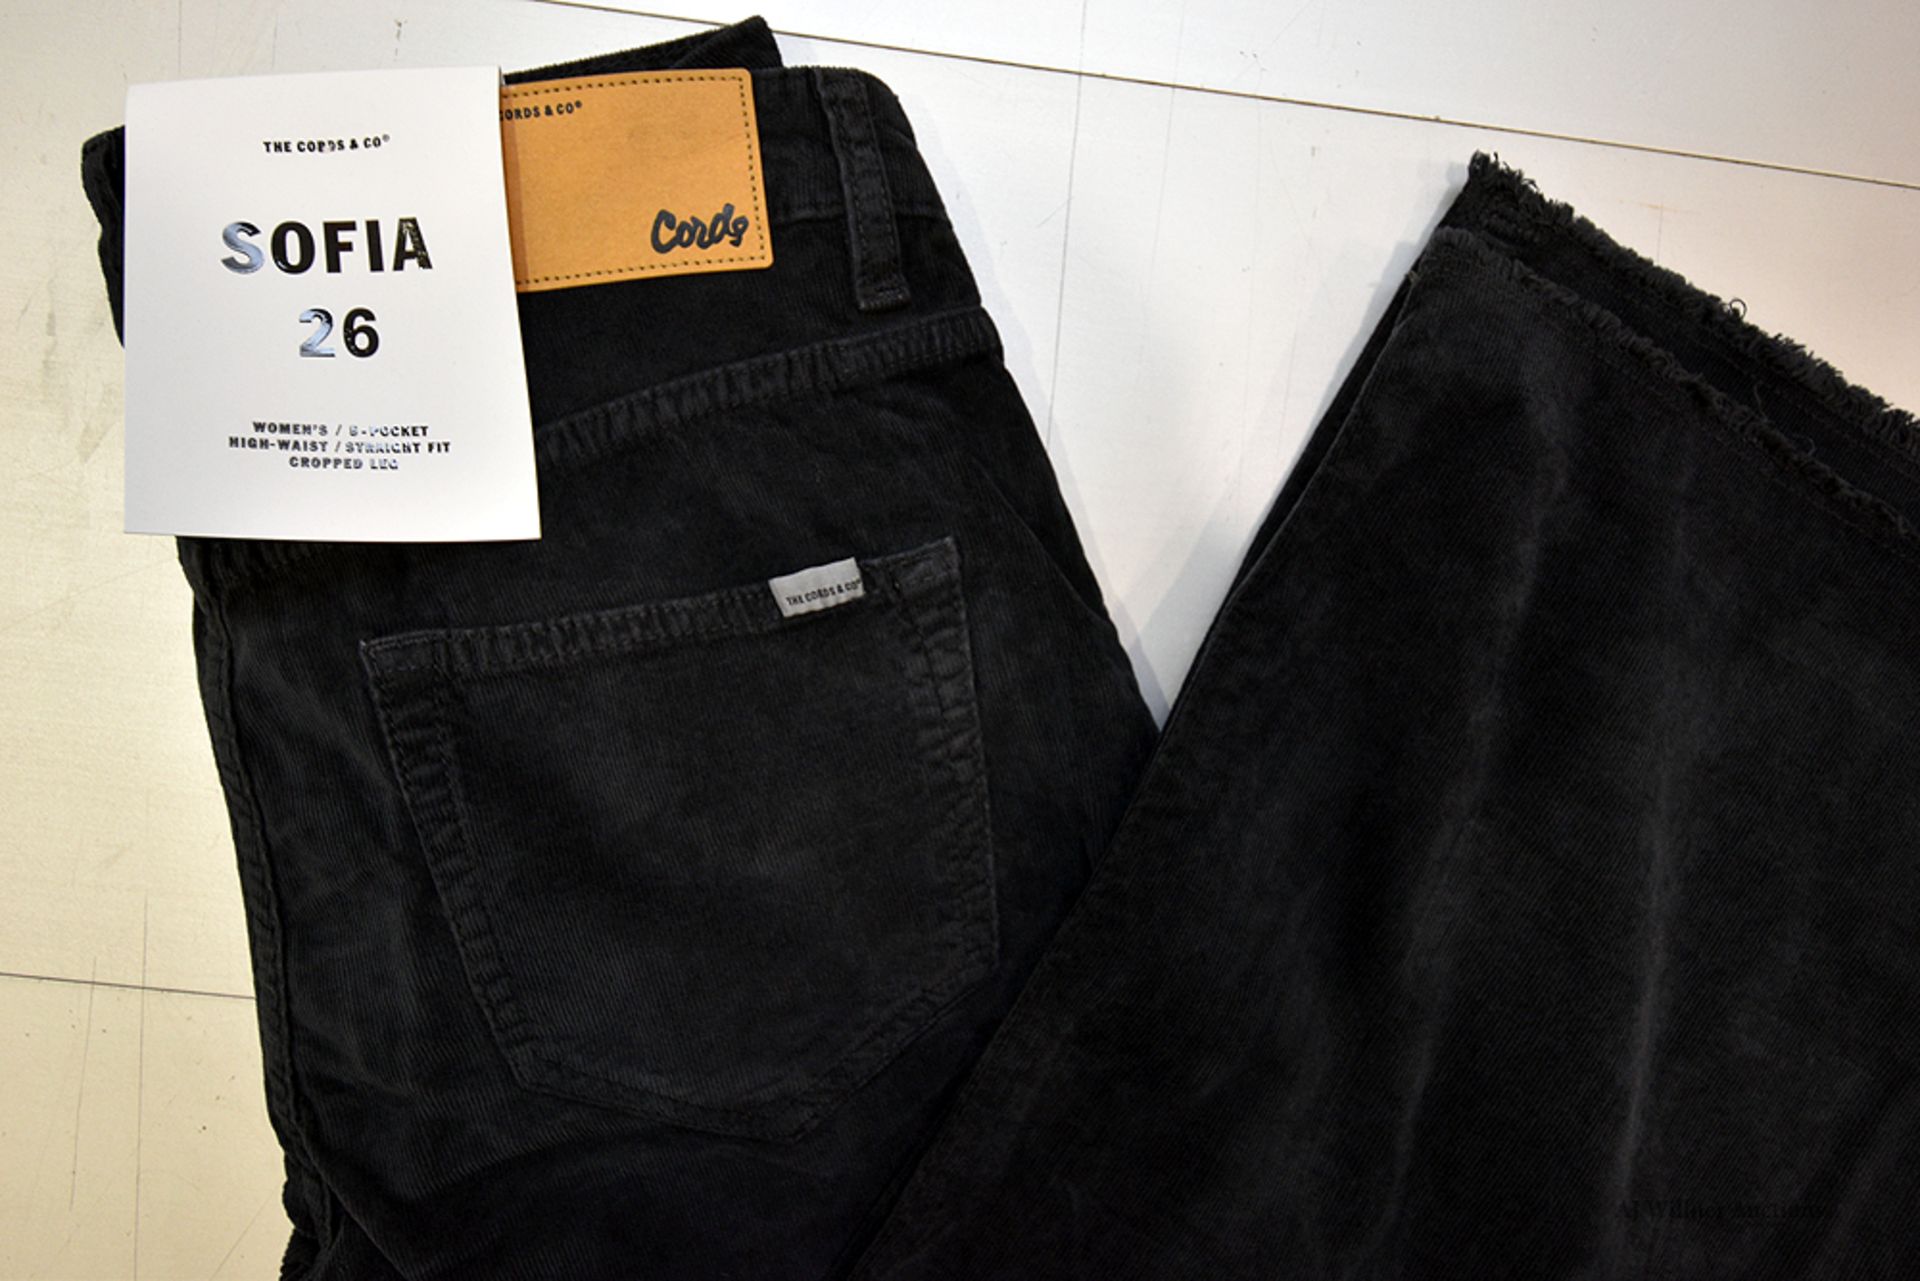 The Cords & Co. "Sofia" Style, Women's/ 5-Pocket/High-Waist/ Straight Fit/ Cropped Leg Pants(Black) - Image 2 of 3